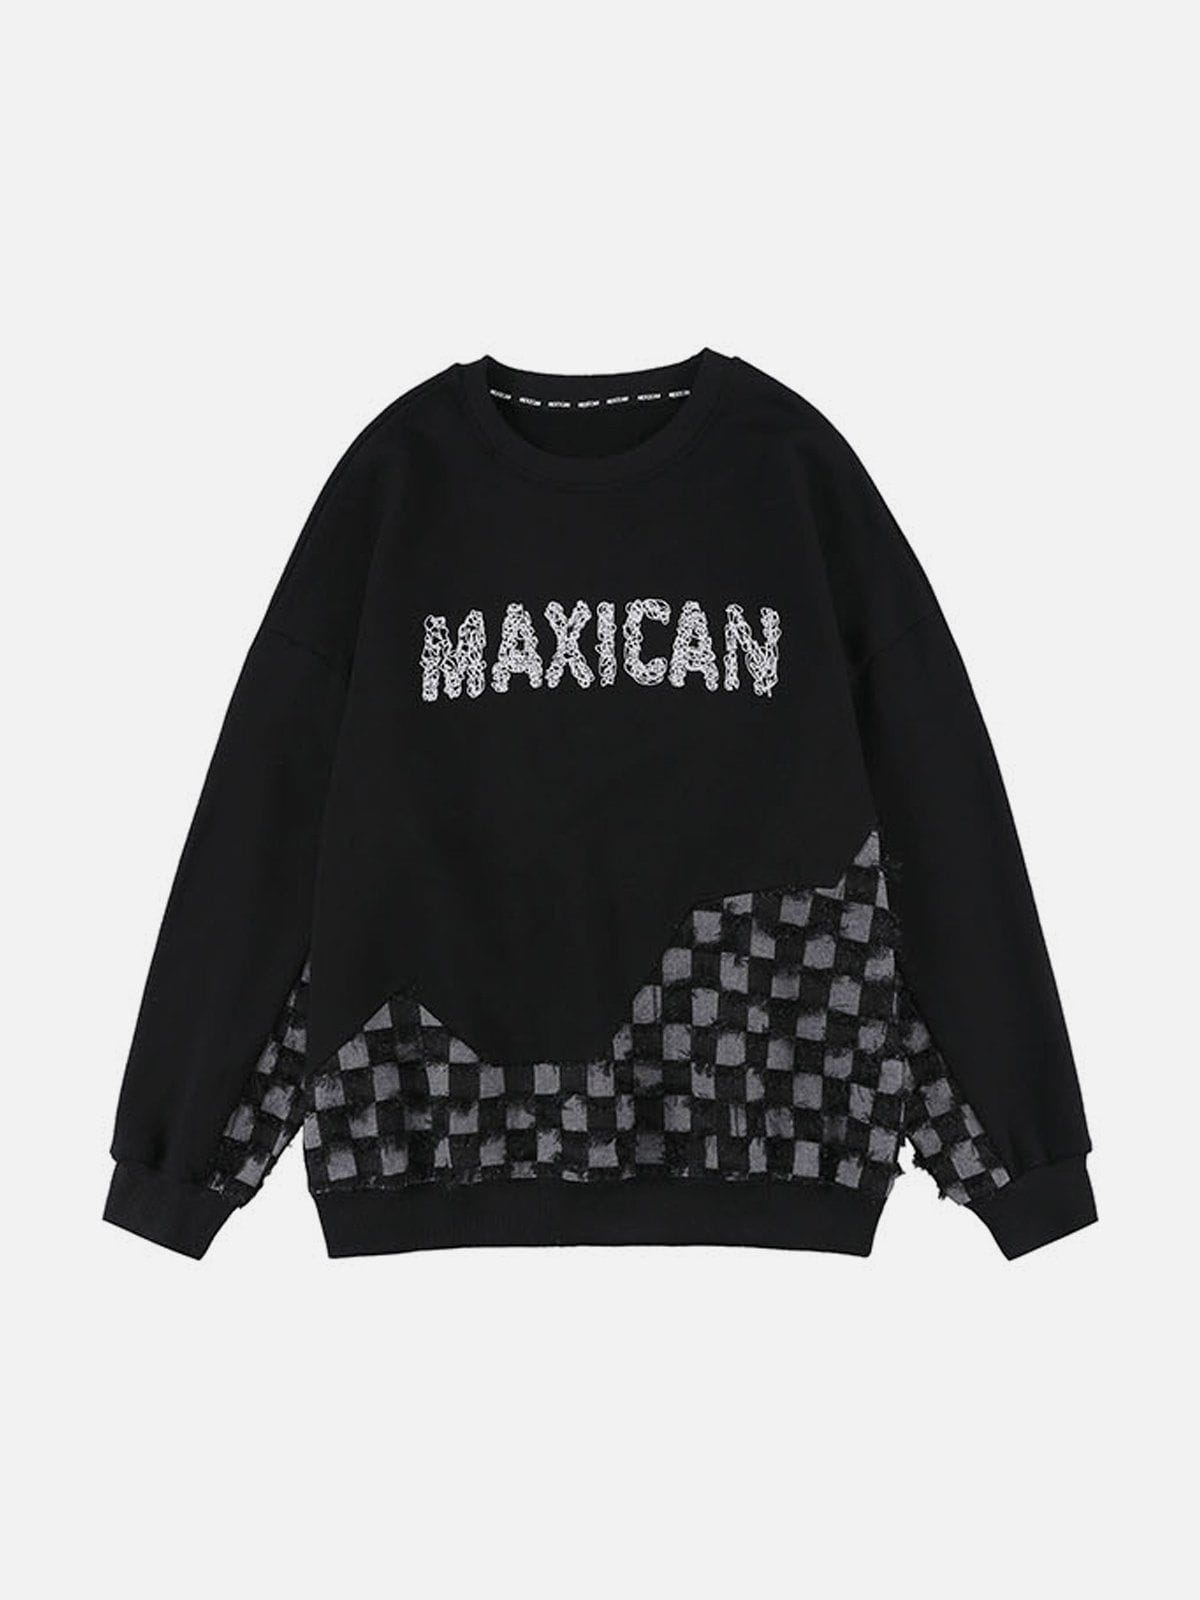 LUXENFY™ - Letters "MAXICAN" Patchwork Sweatshirt luxenfy.com